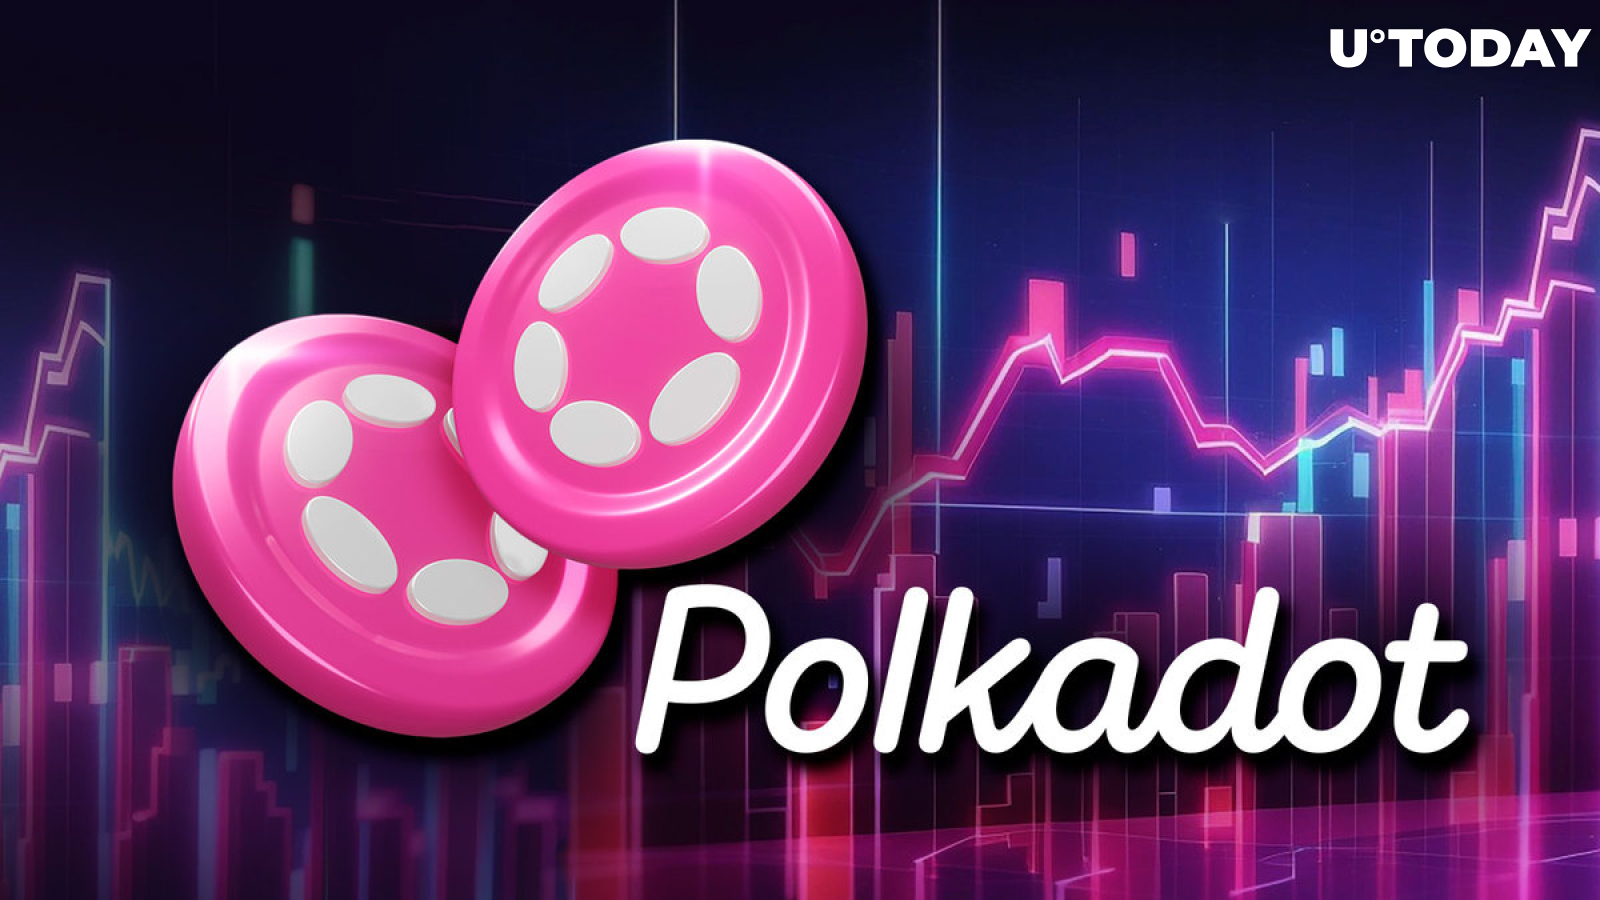 Polkadot (DOT) Hits Historic Highs in Staking, Other Metrics: Report